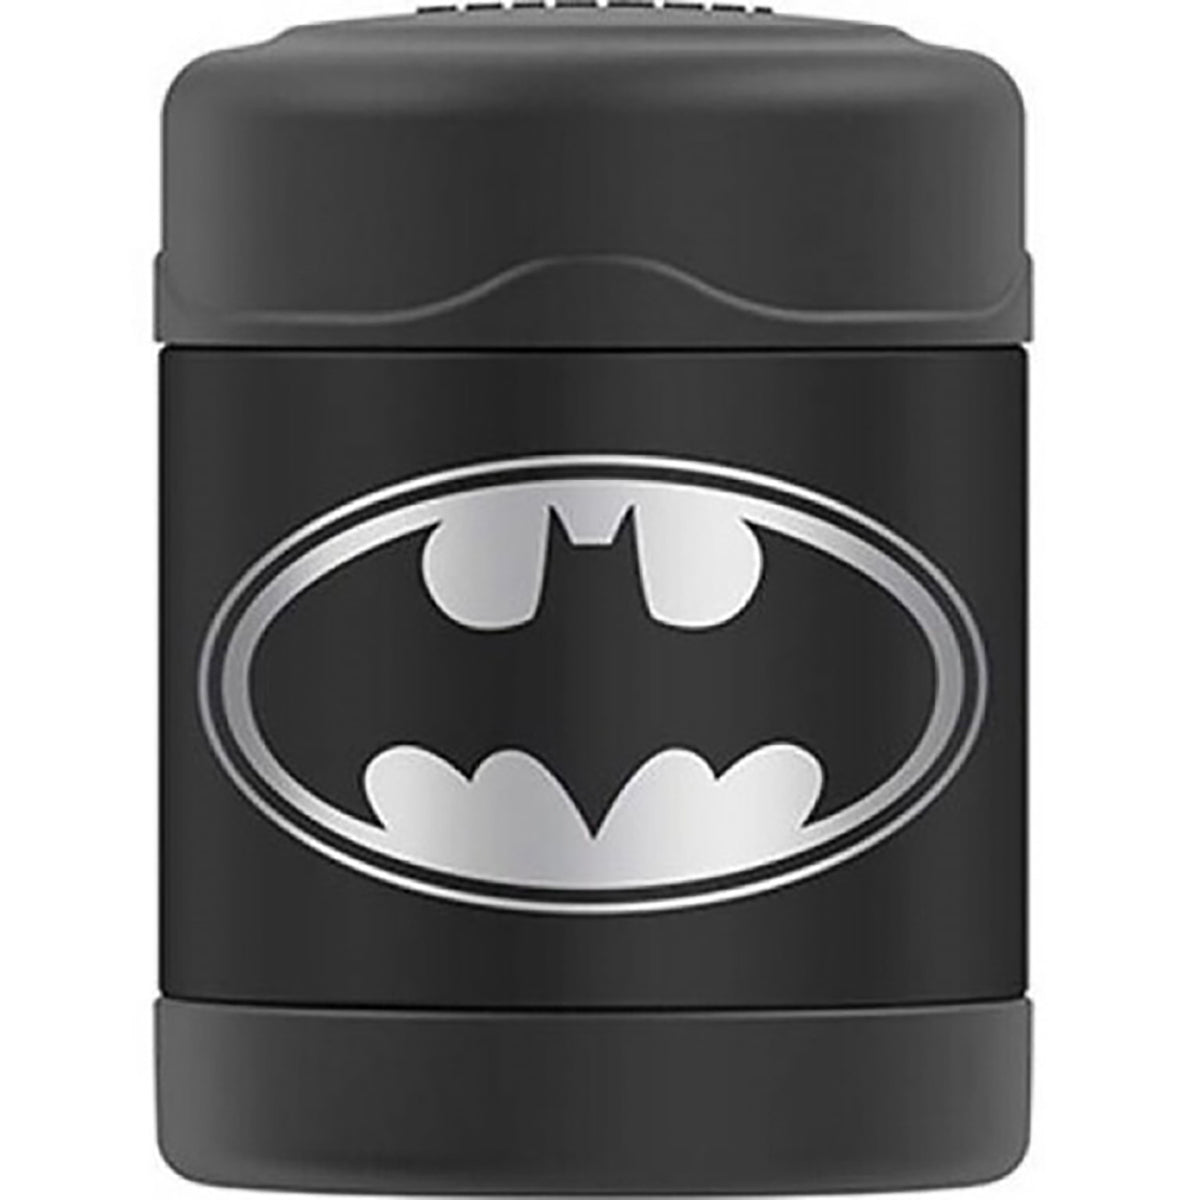 Thermos 10 oz. Kid's Funtainer Batman Stainless Steel Food Jar - Gray/Black Thermos